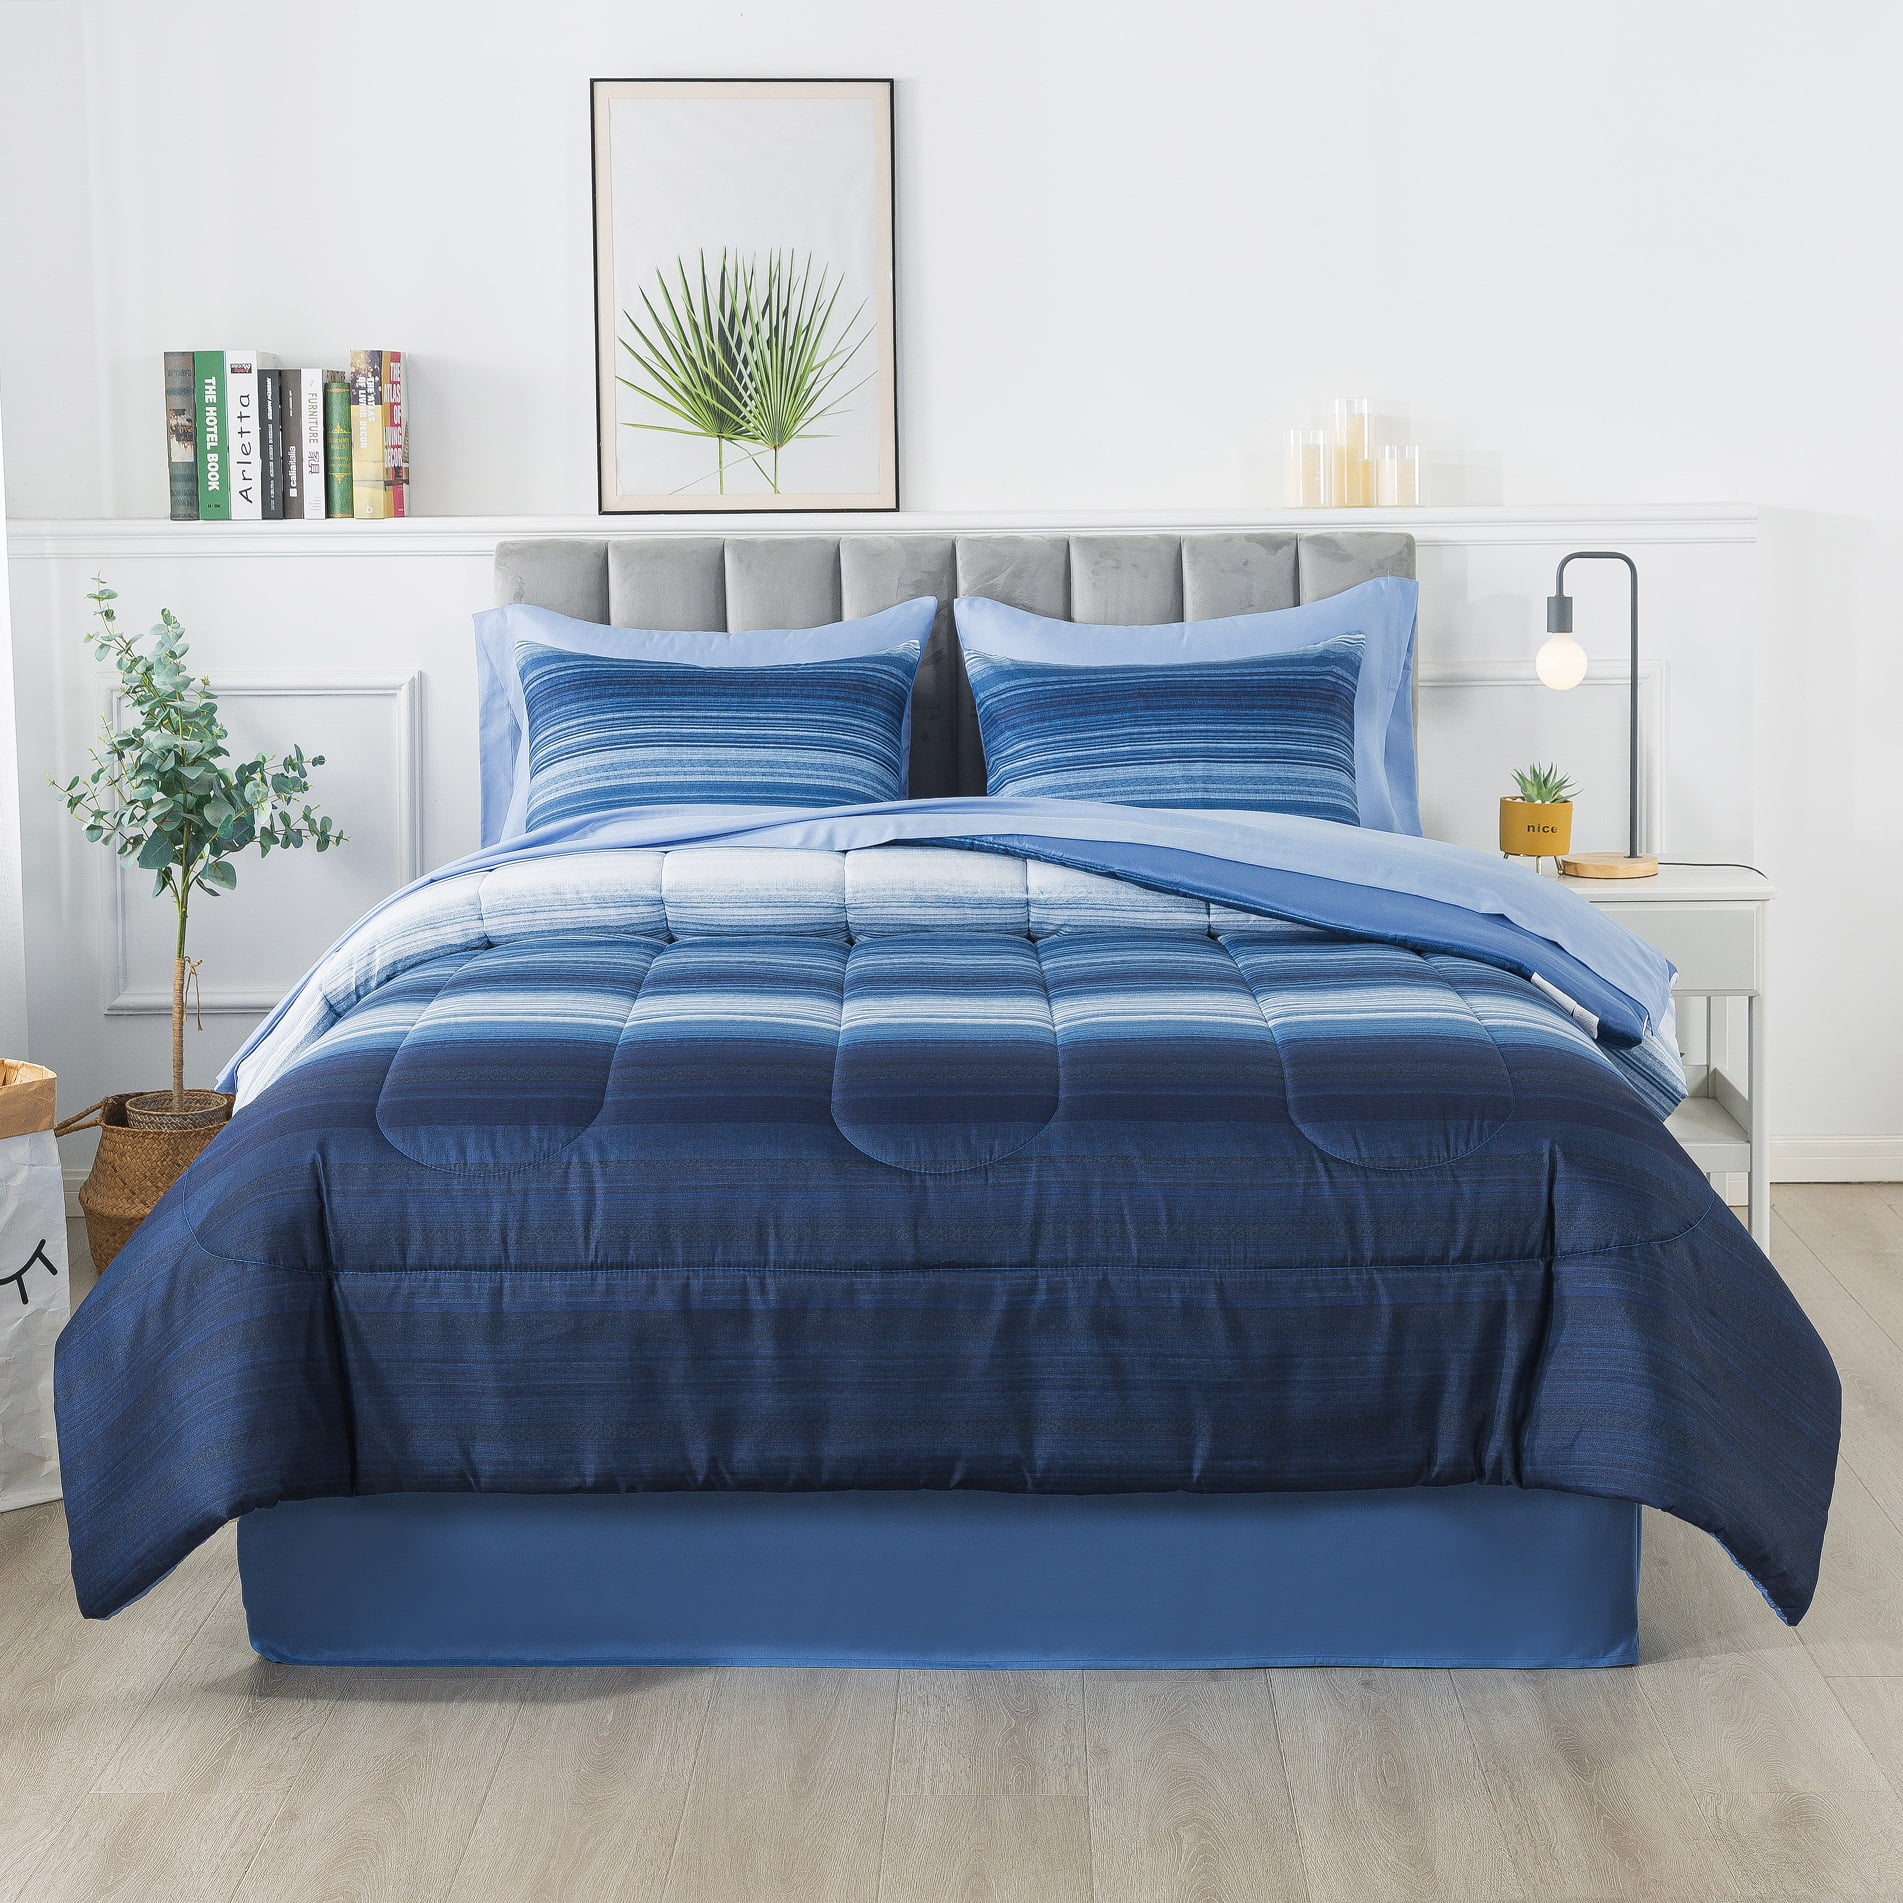 Mainstays Ombre Stripe Microfiber, Blue Bed In A Bag King